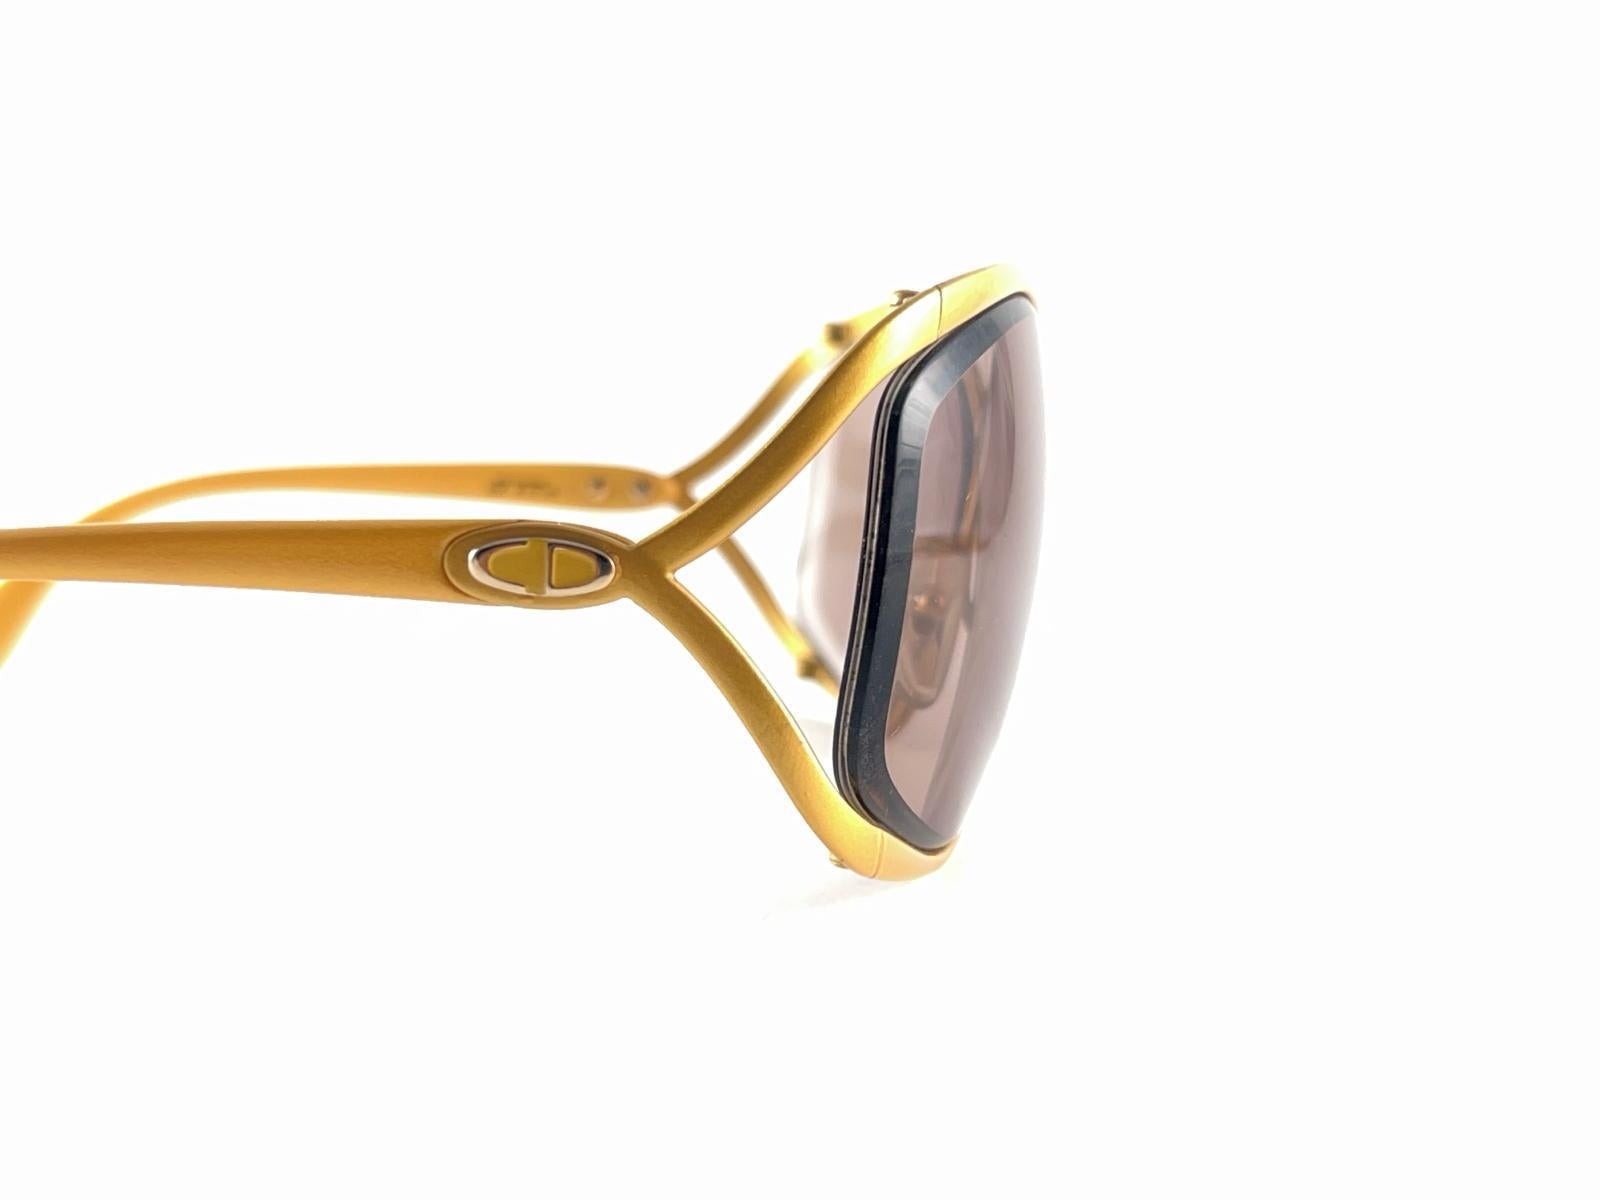 New Vintage Christian Dior 2056 40 Butterfly Mustard Sunglasses Made in Germany For Sale 3